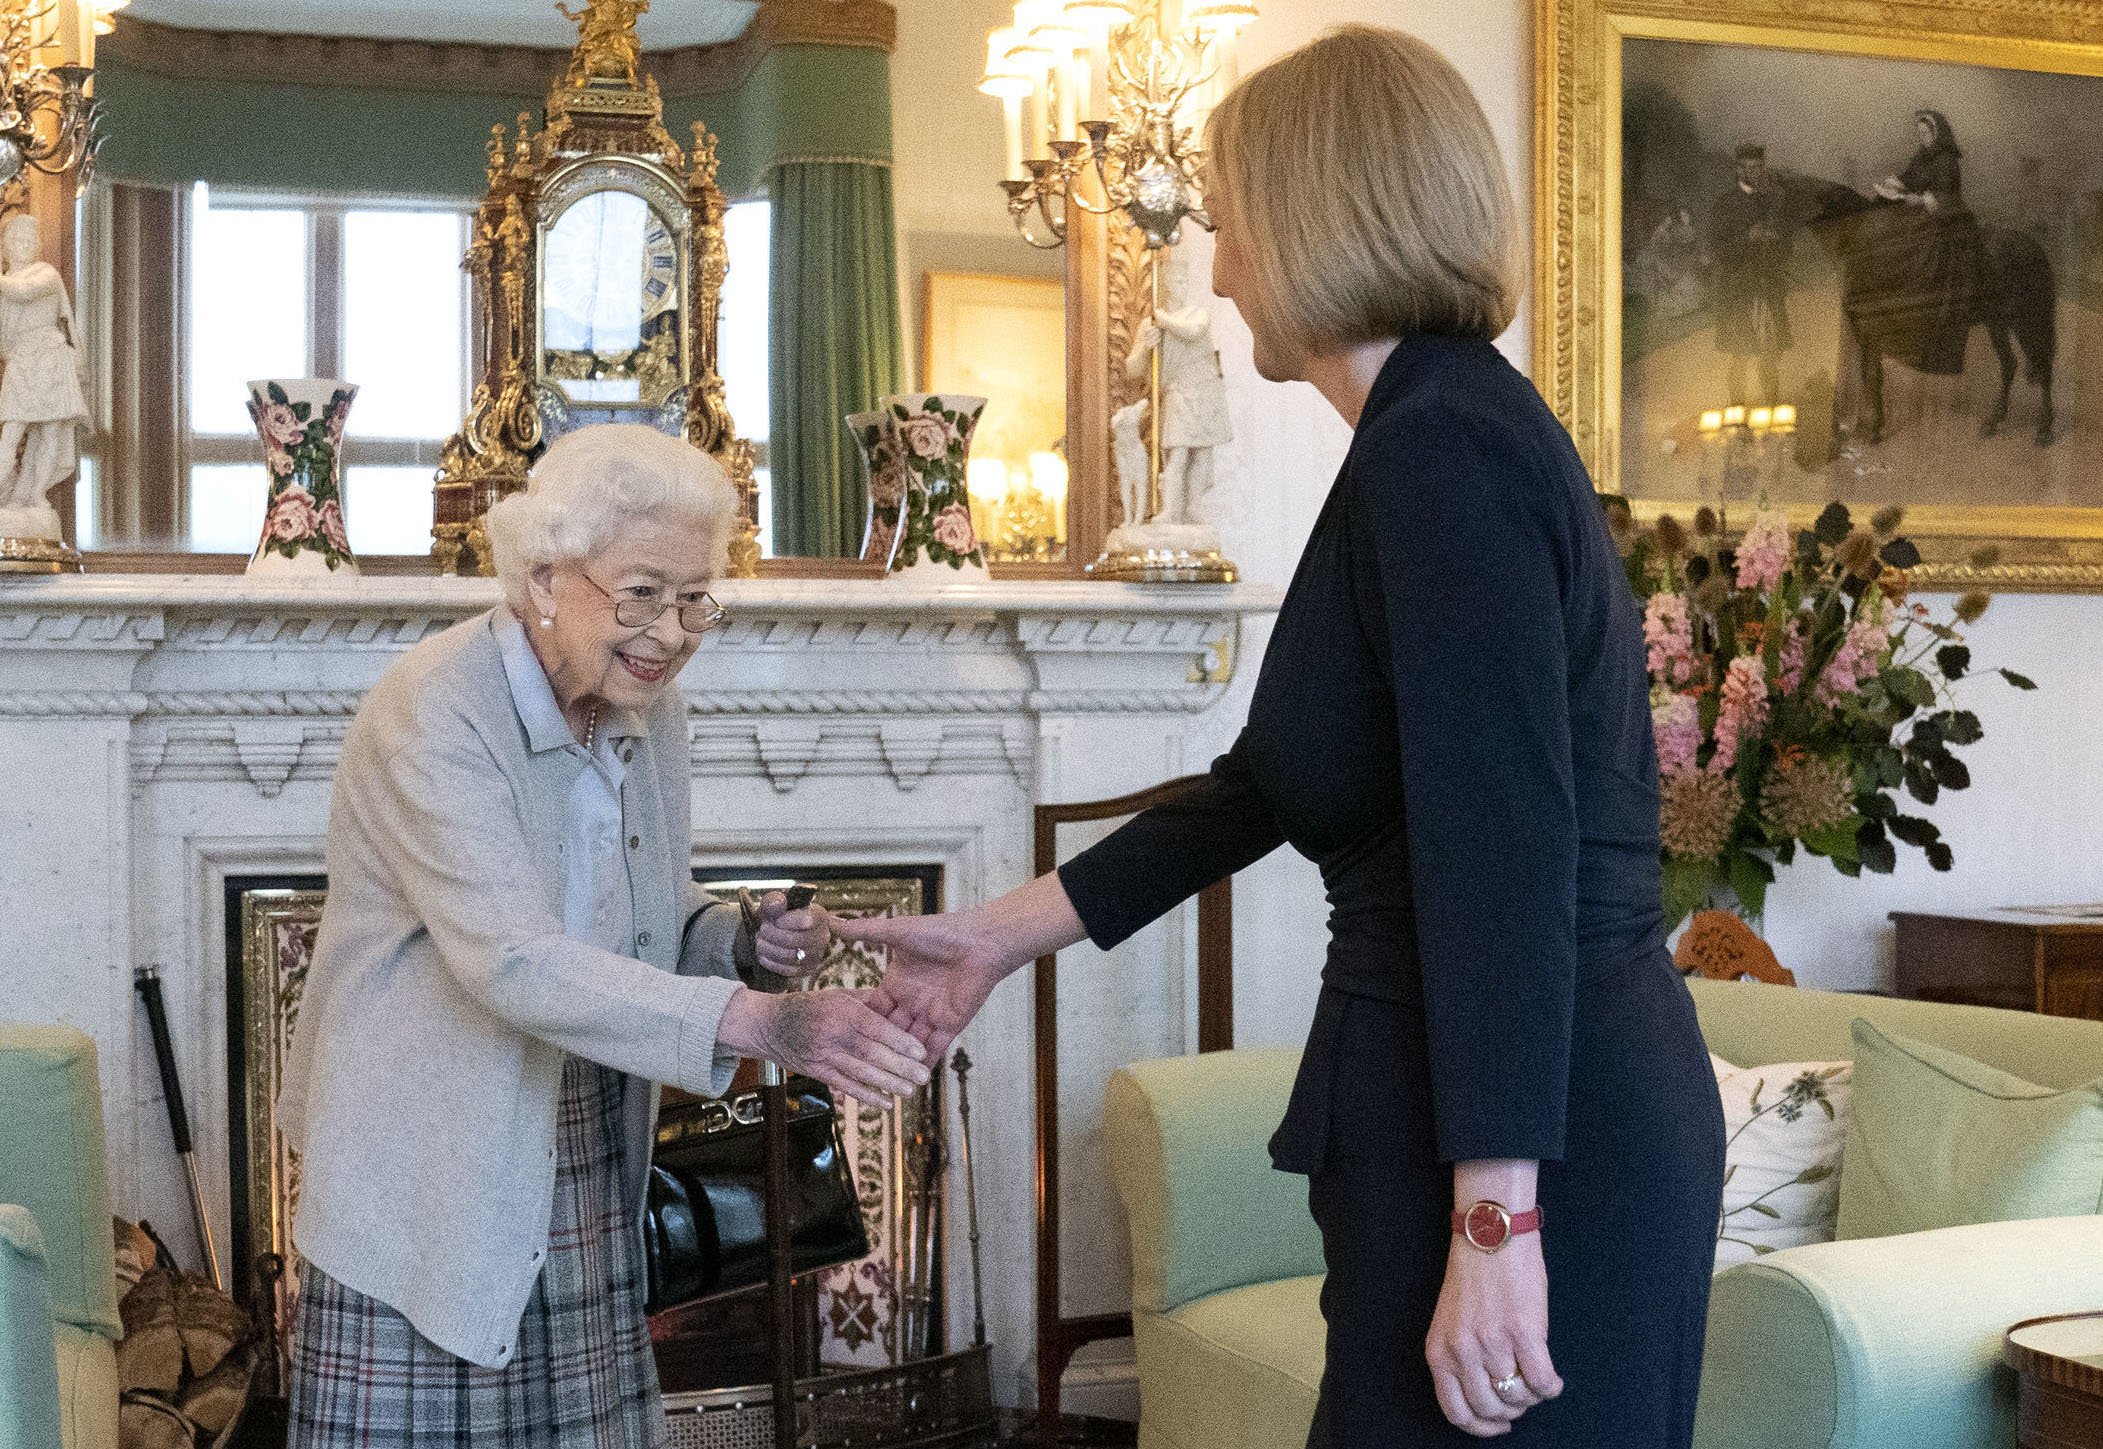 Queen Elizabeth greets newly elected leader of the Conservative party Liz Truss at Balmoral Castle on September 6, 2022 in Aberdeen, Scotland. | Source: Getty Images